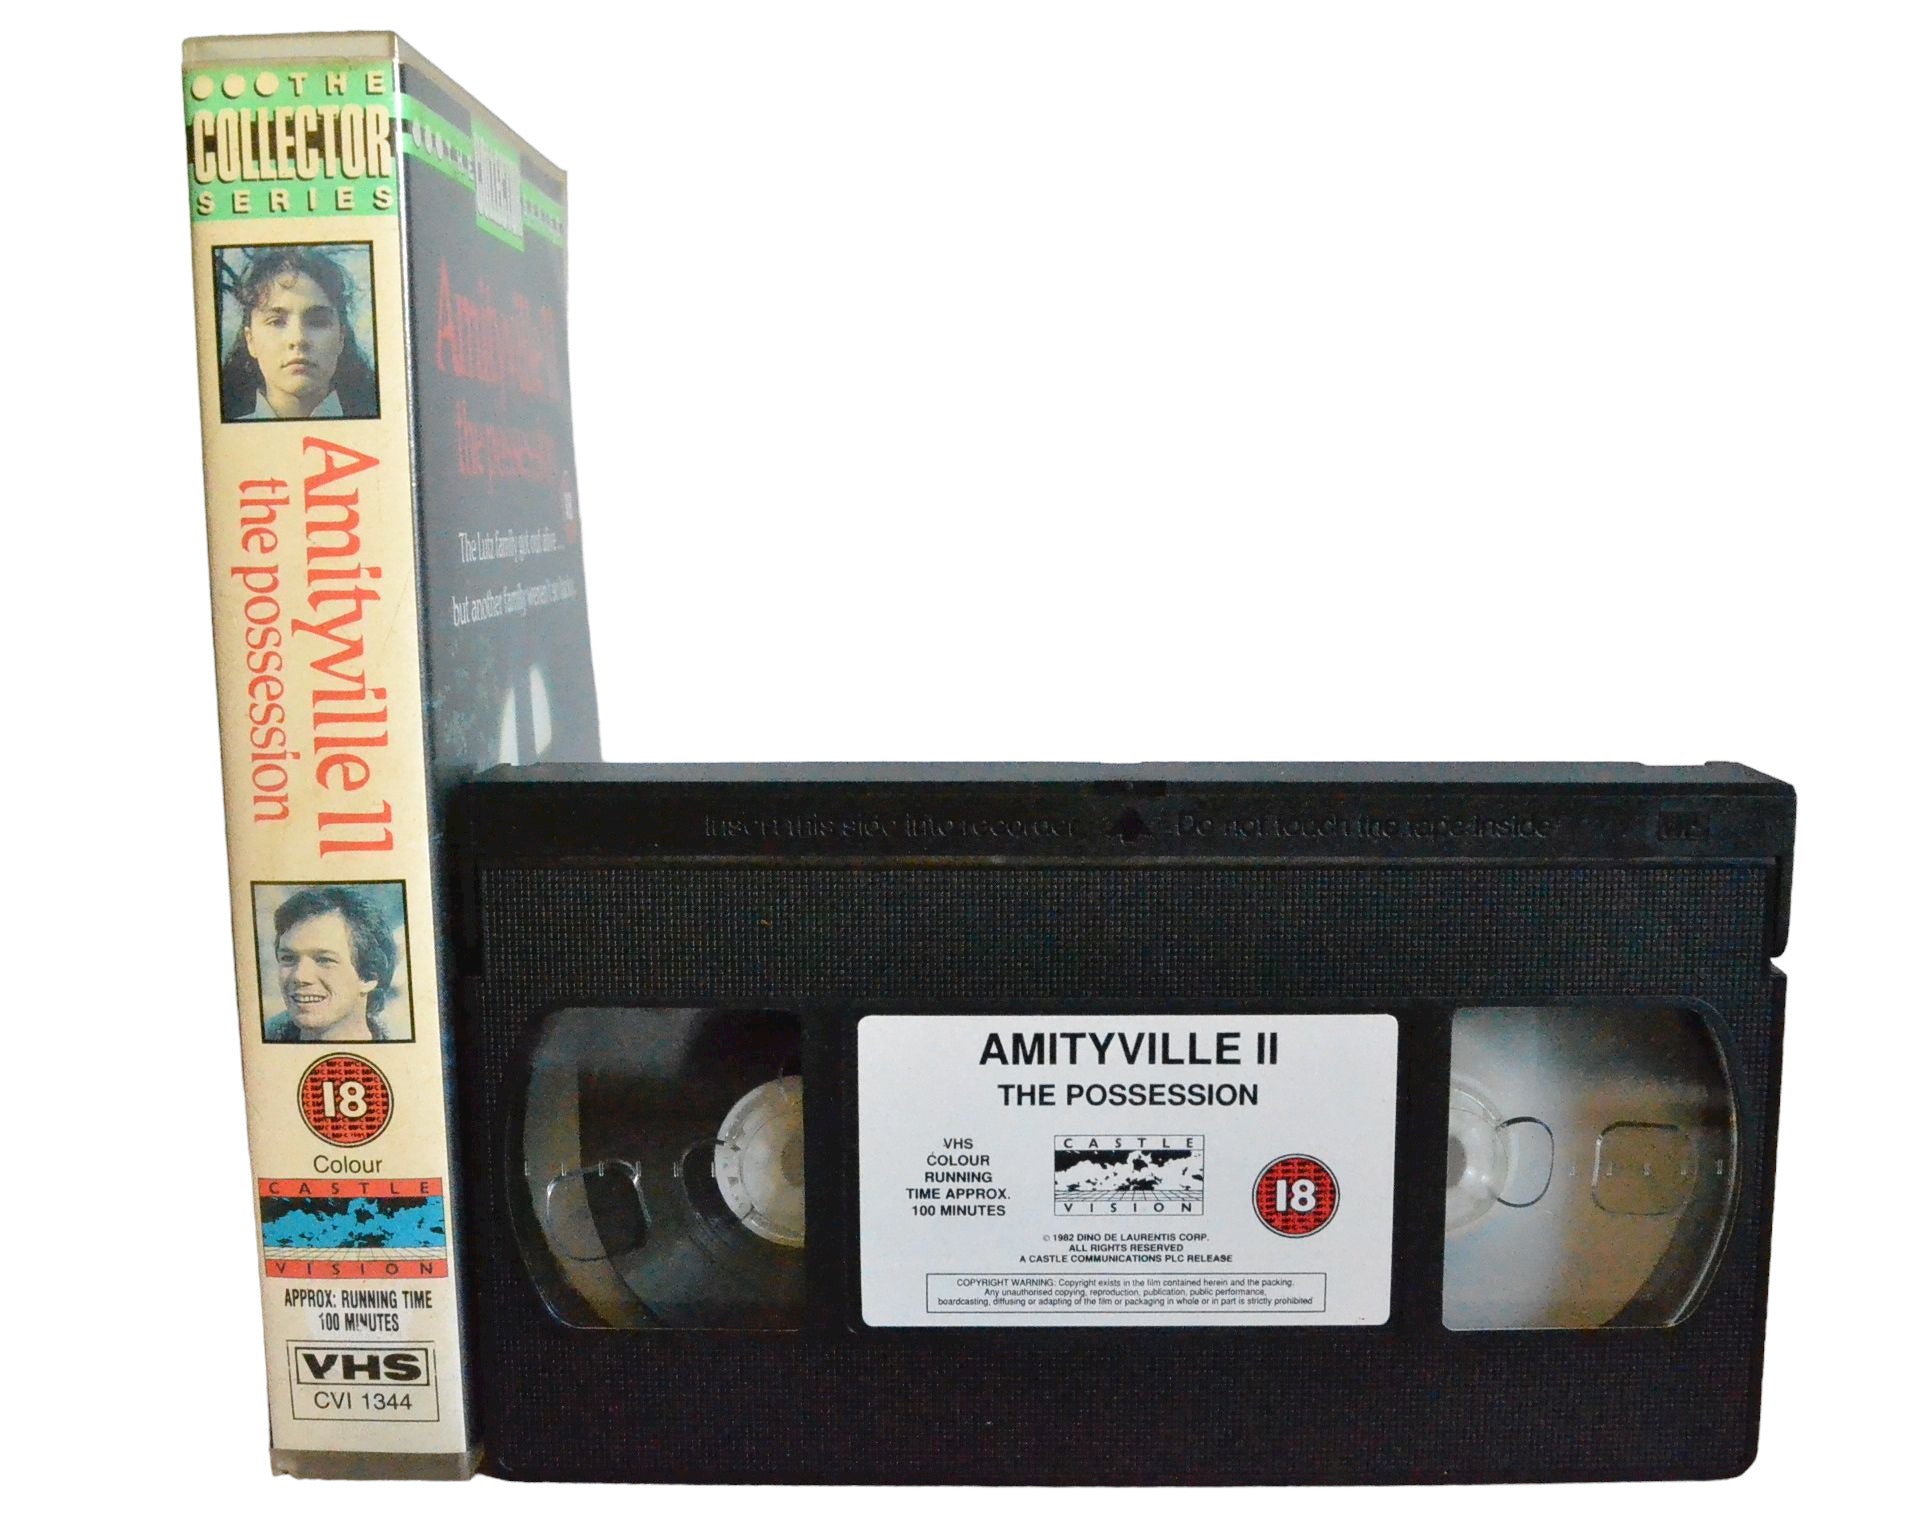 Amityville 2 The Possession - James Olson - Castle Vision - Horror - Pal - VHS-